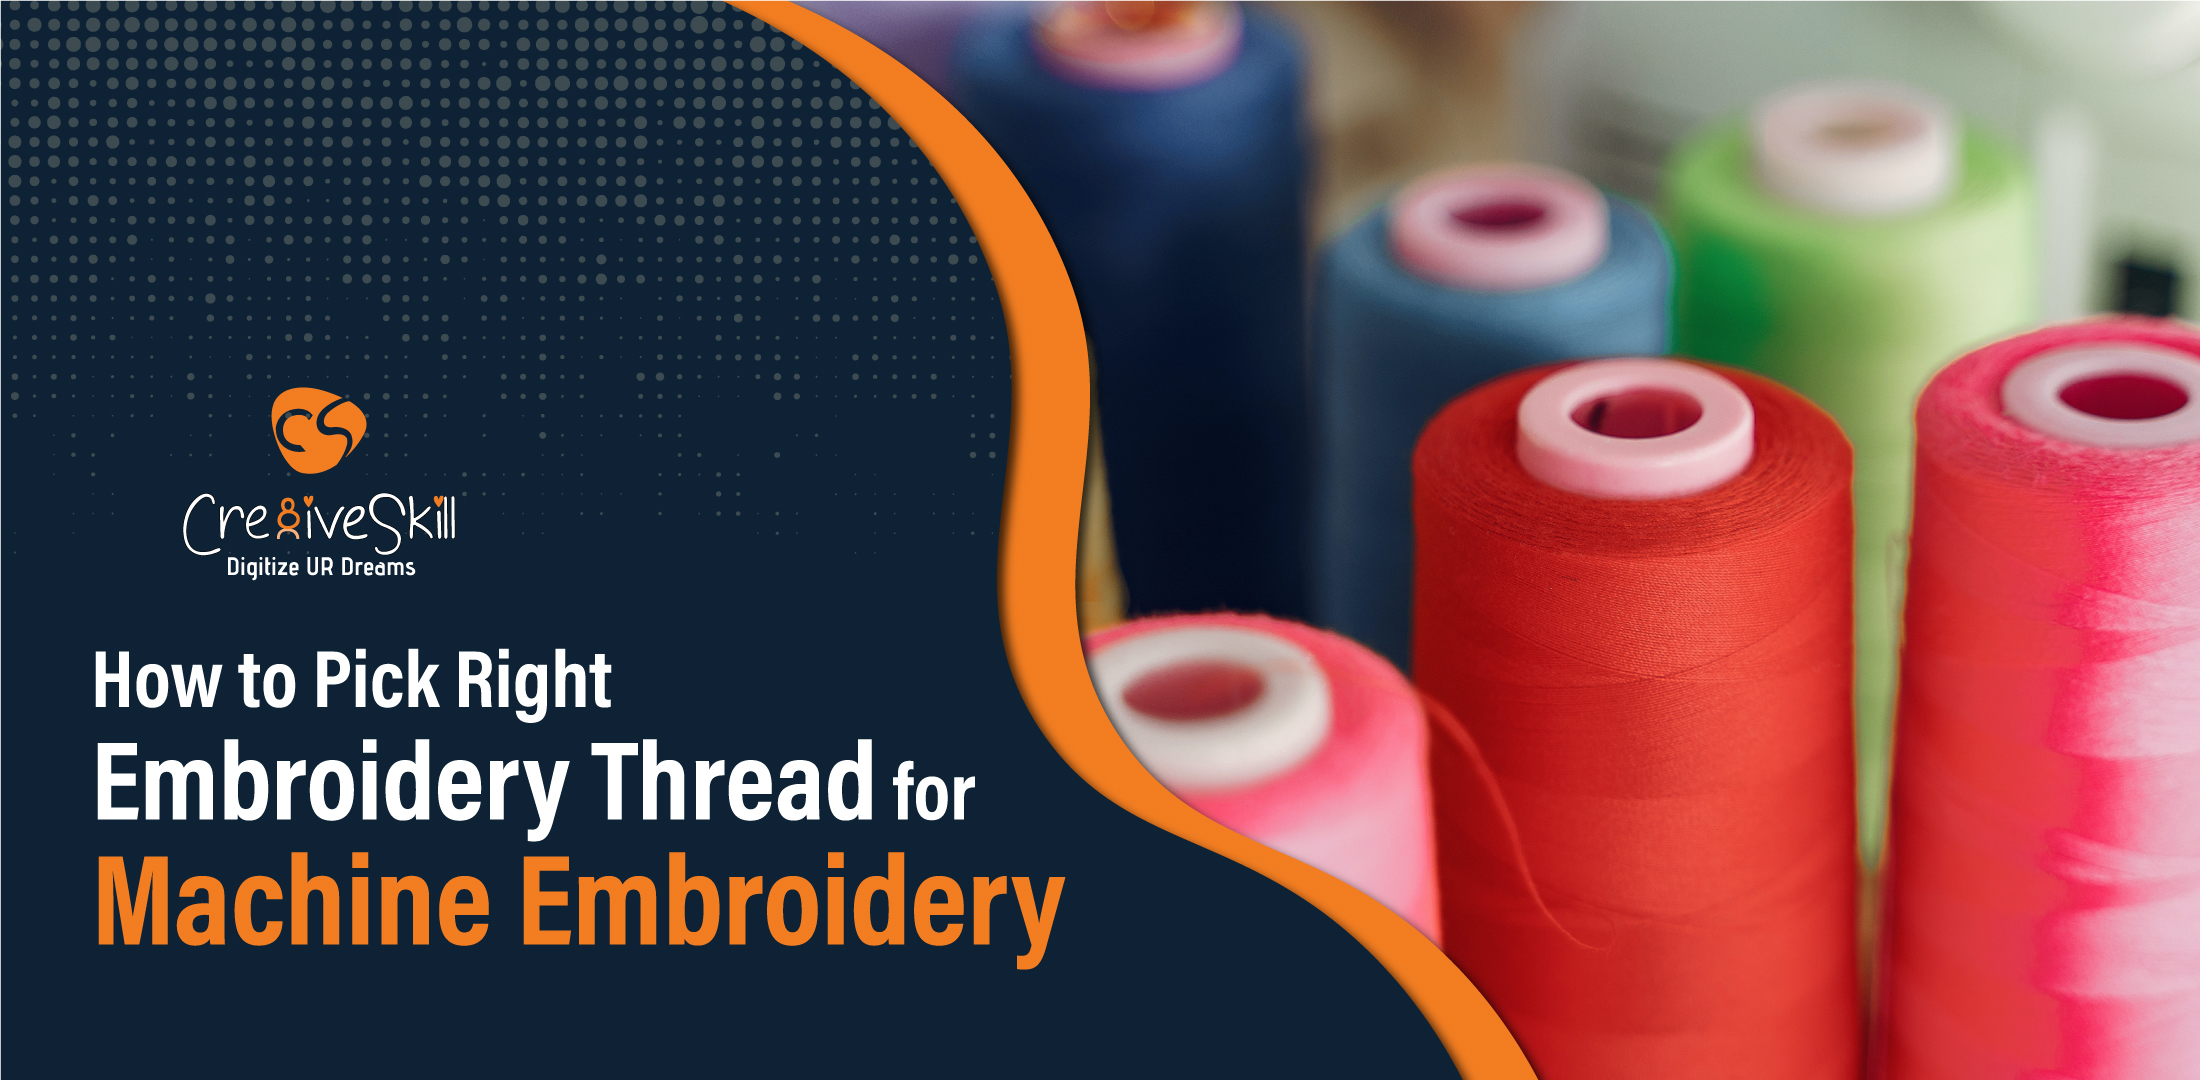 What Thread Weights Should I Used For Machine Embroidery